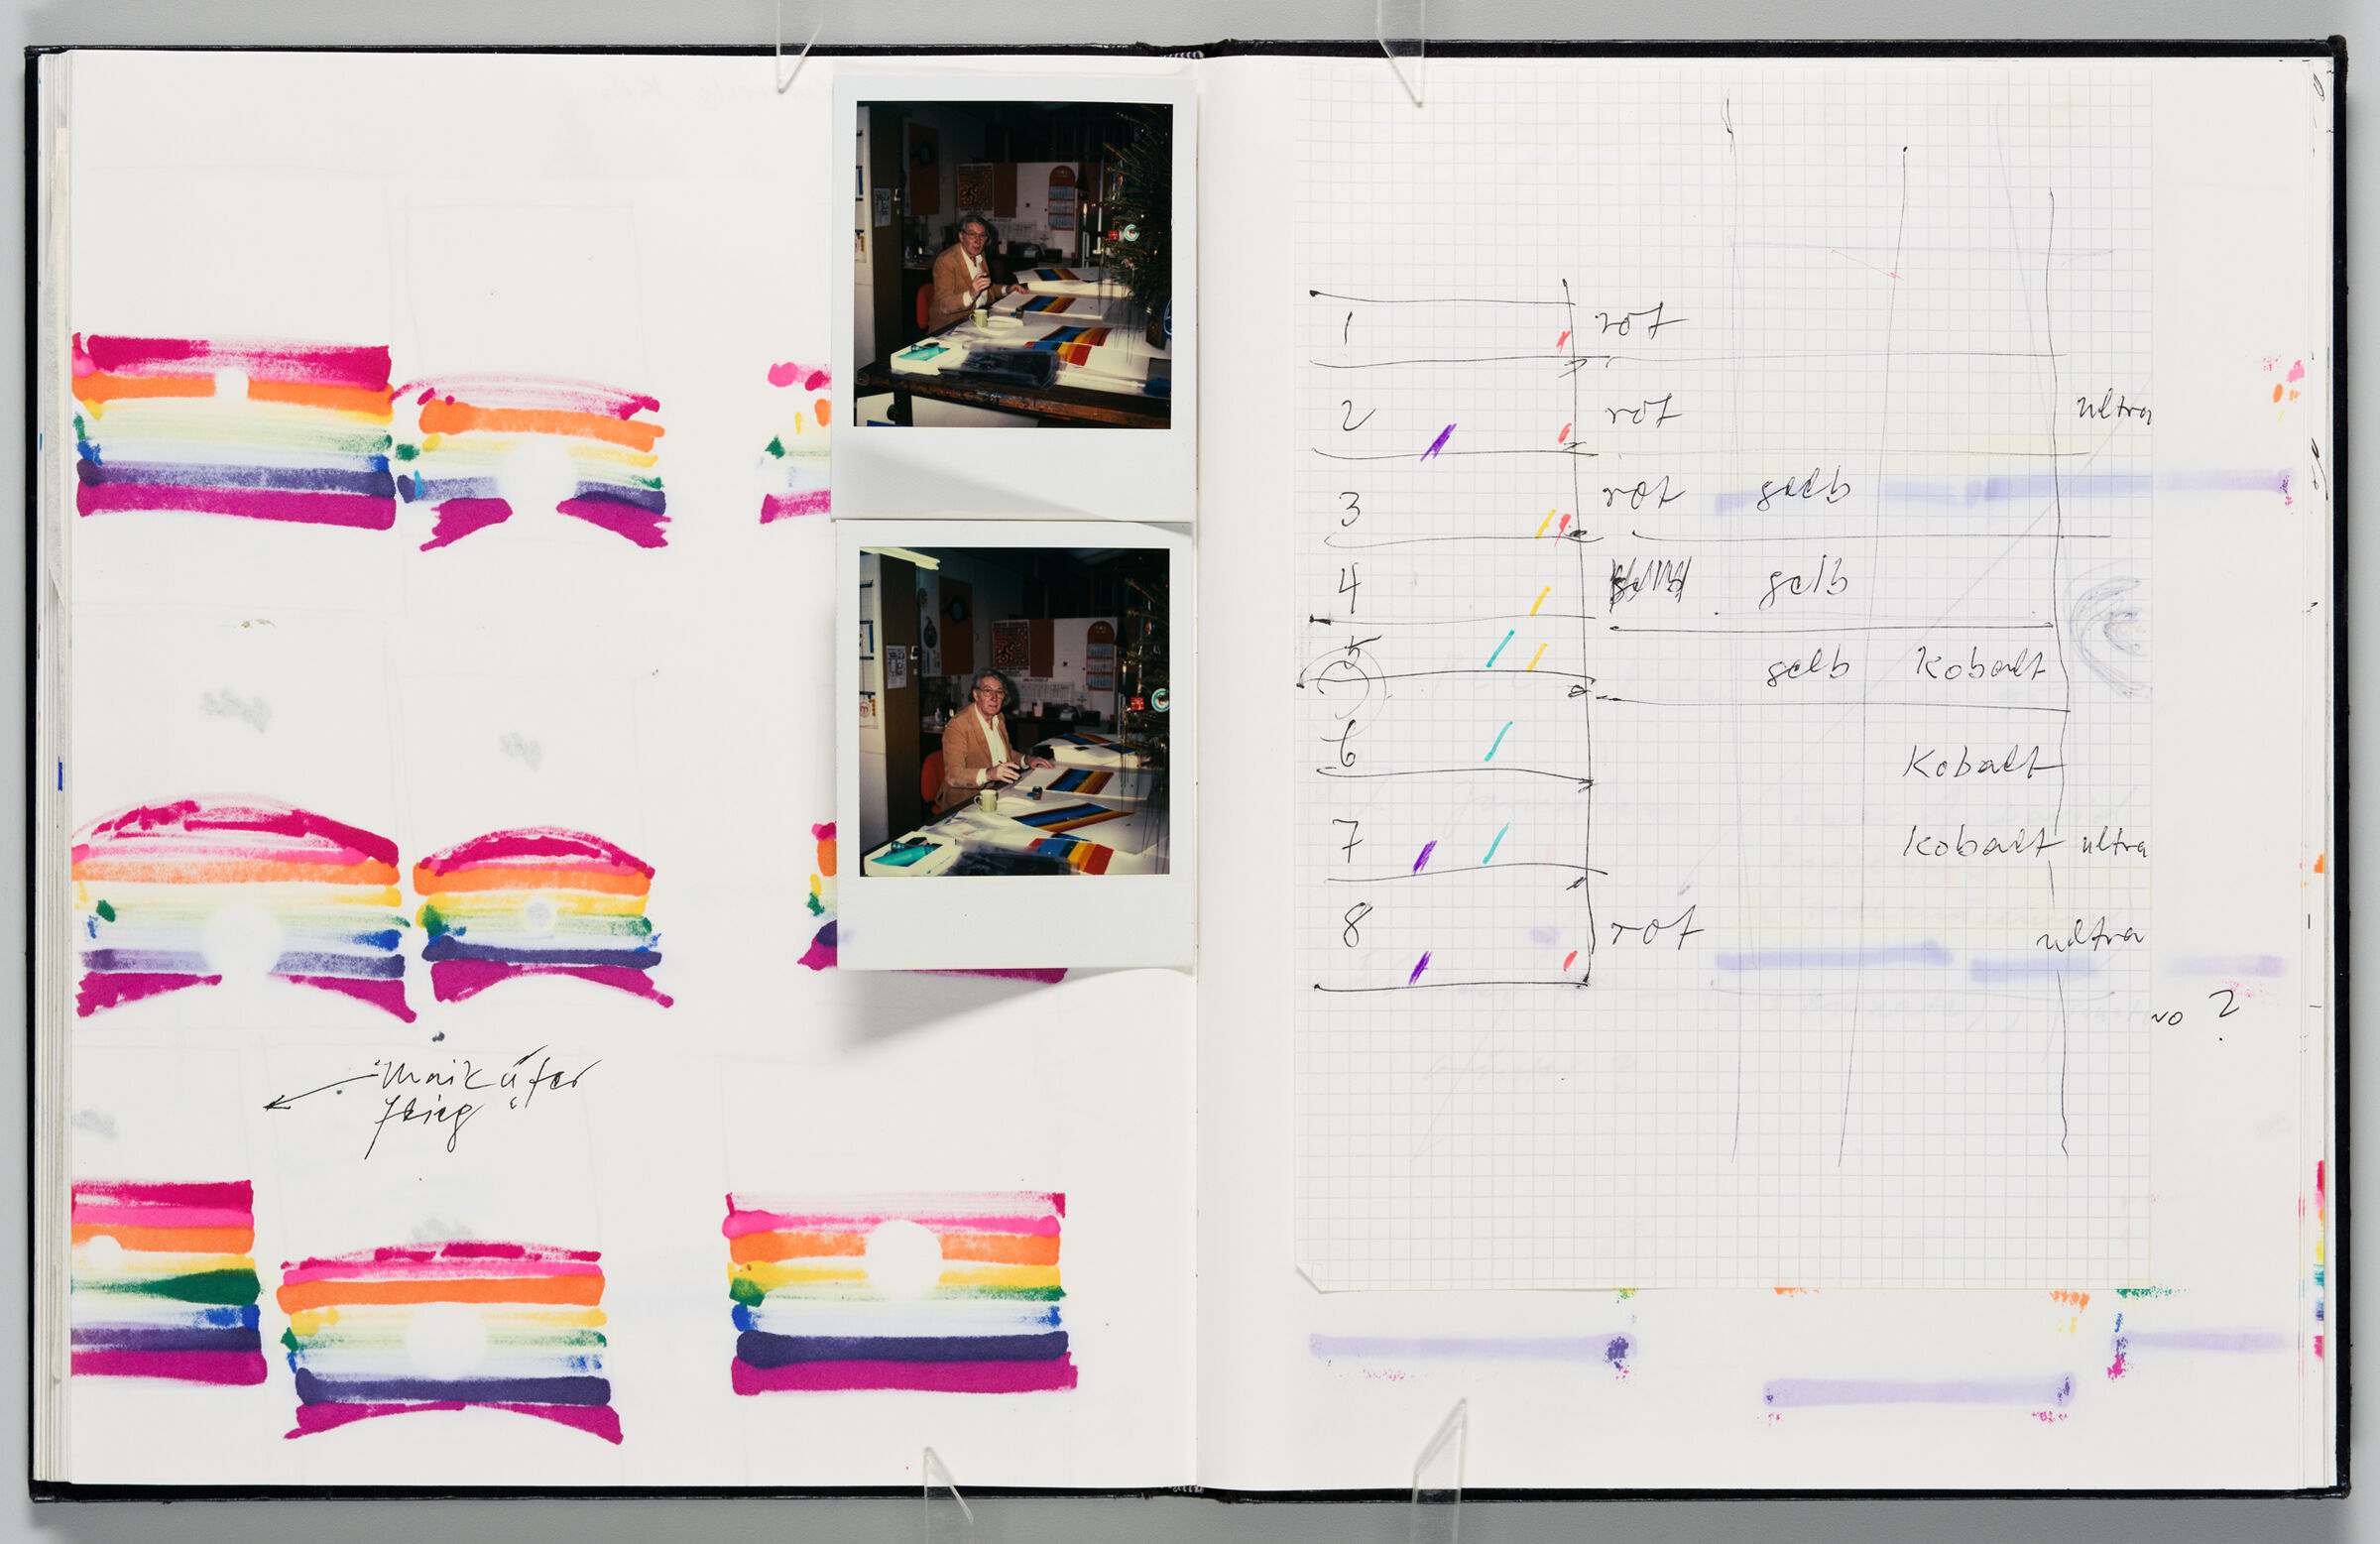 Untitled (Bleed-Through Of Previous Page With Note And Adhered Polaroids Of Artist Signing Prints, Left Page); Untitled (Adhered Notes On Graph Paper With Notes On Sketchbook Page, Right Page)